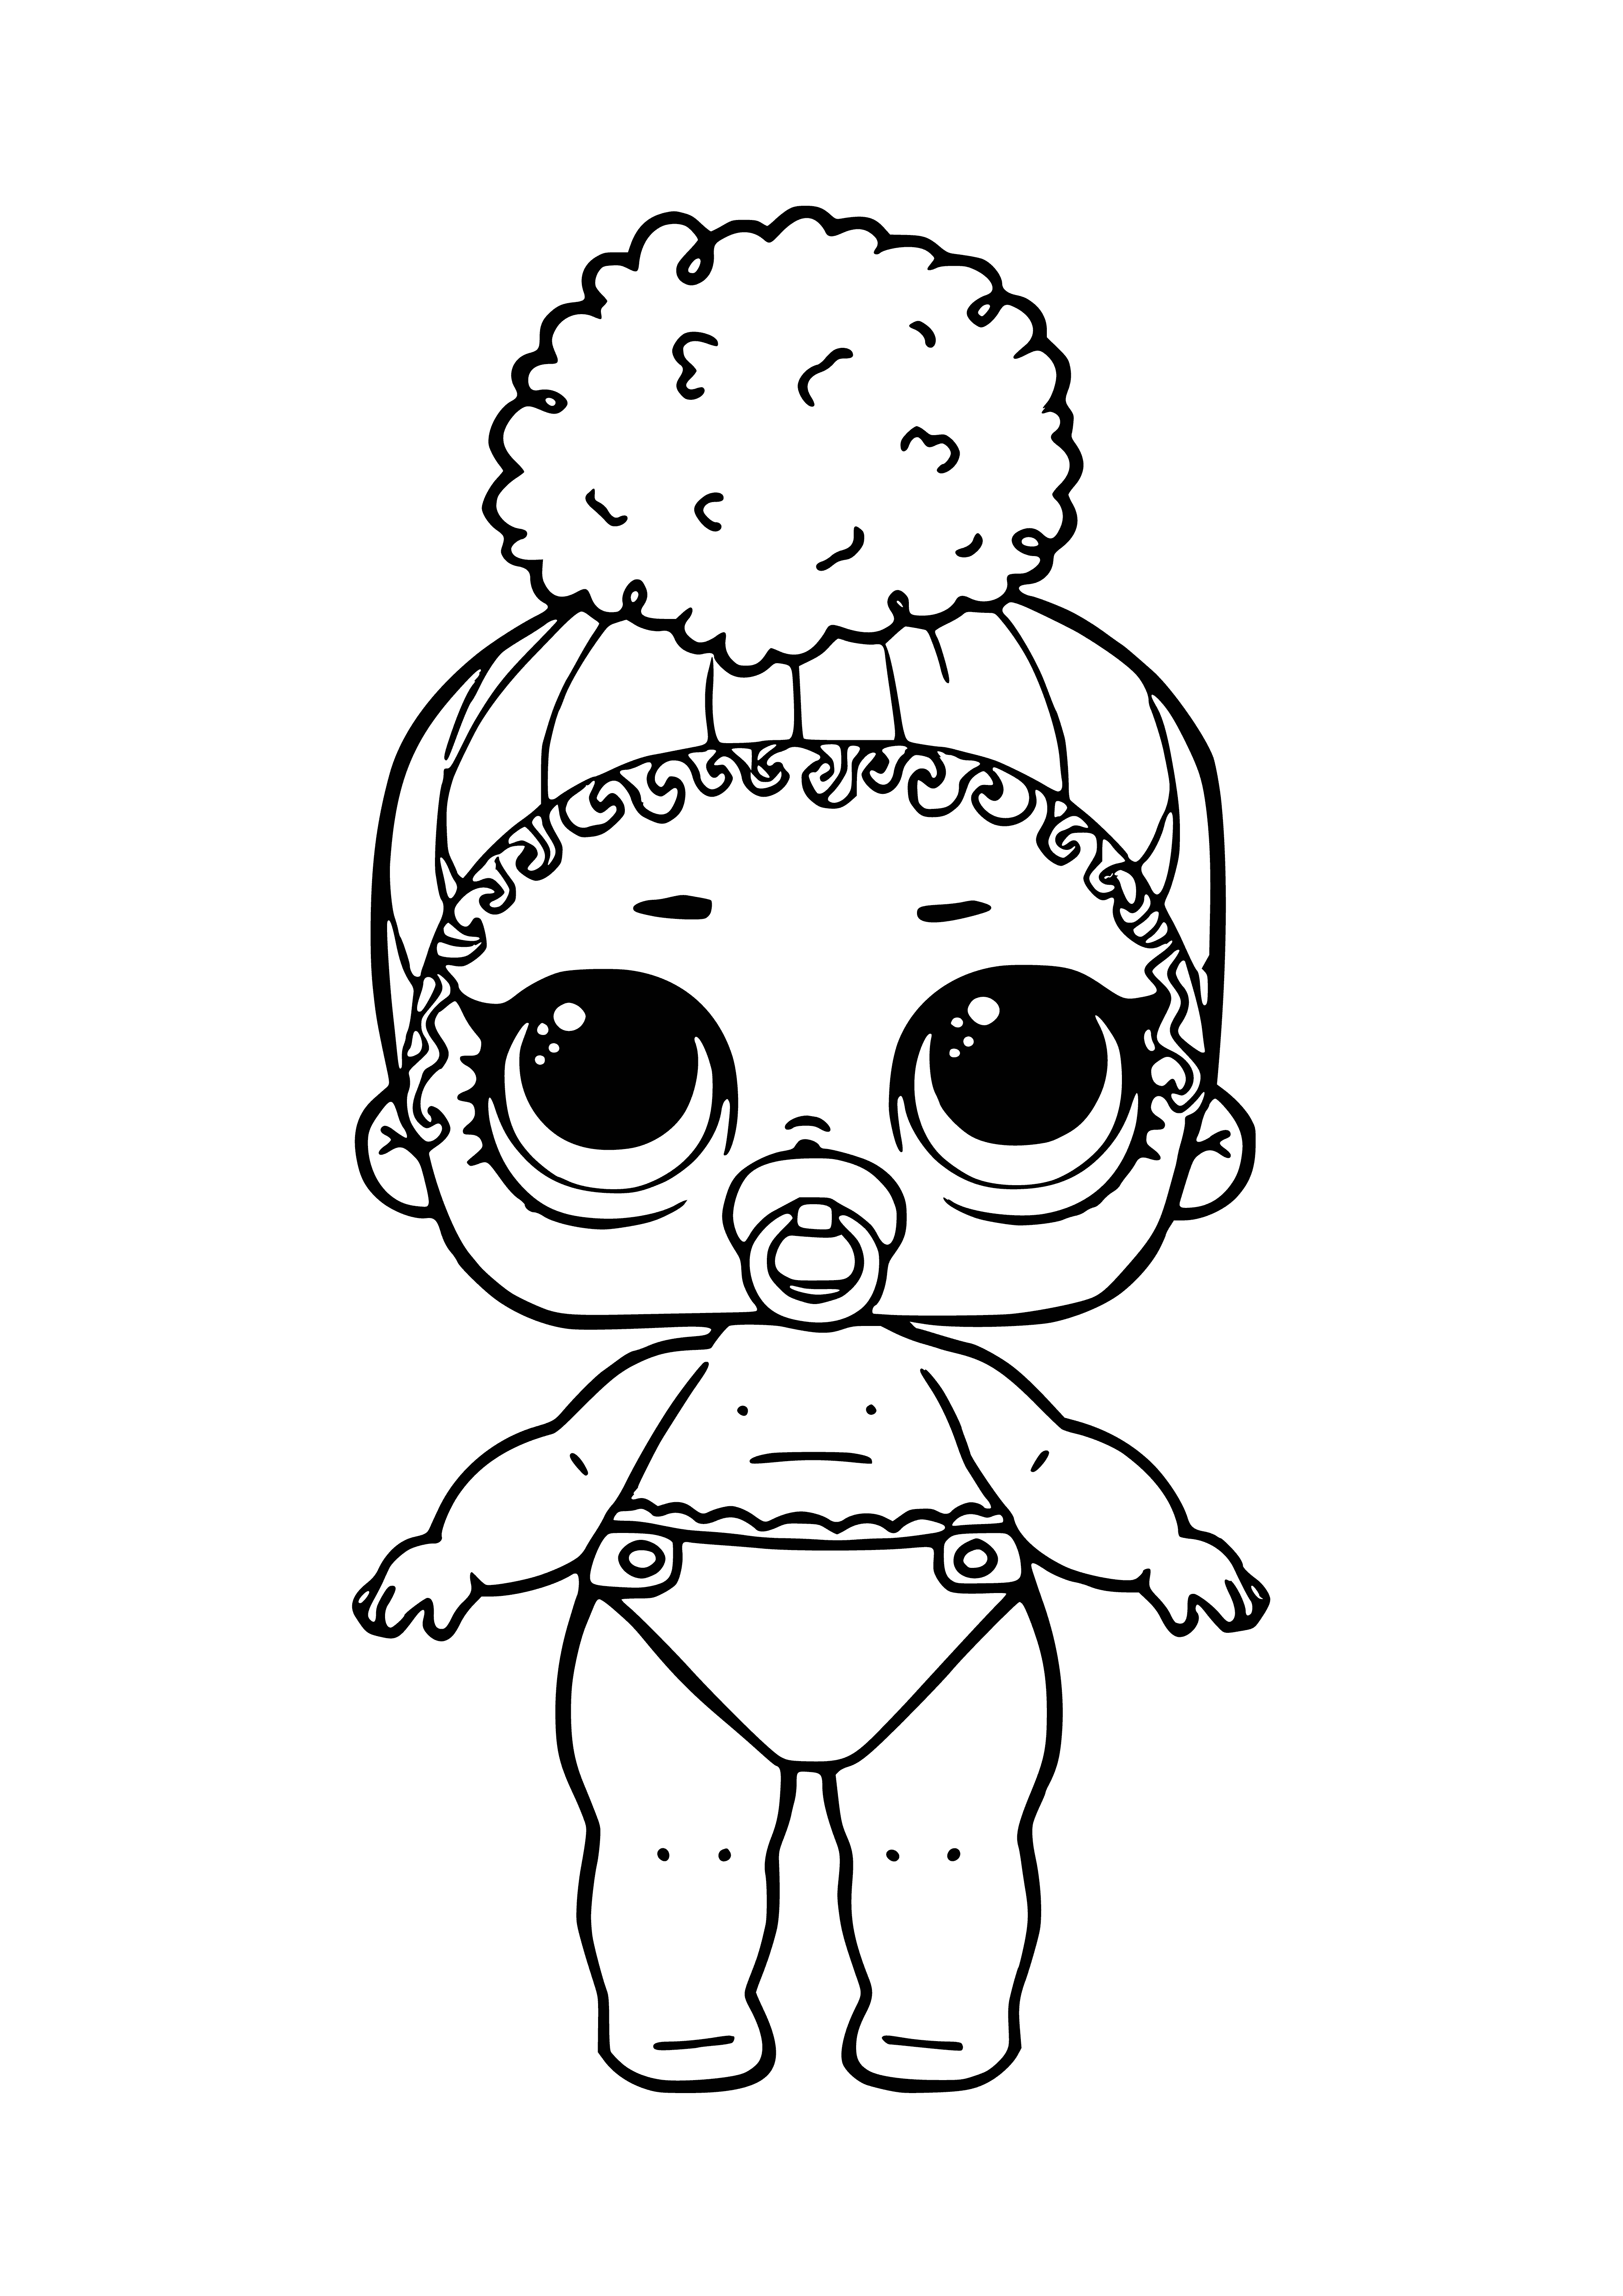 coloring page: Baby in blue "L.O.L" shirt sitting in chair, holding bottle & pacifier, looking at laptop.